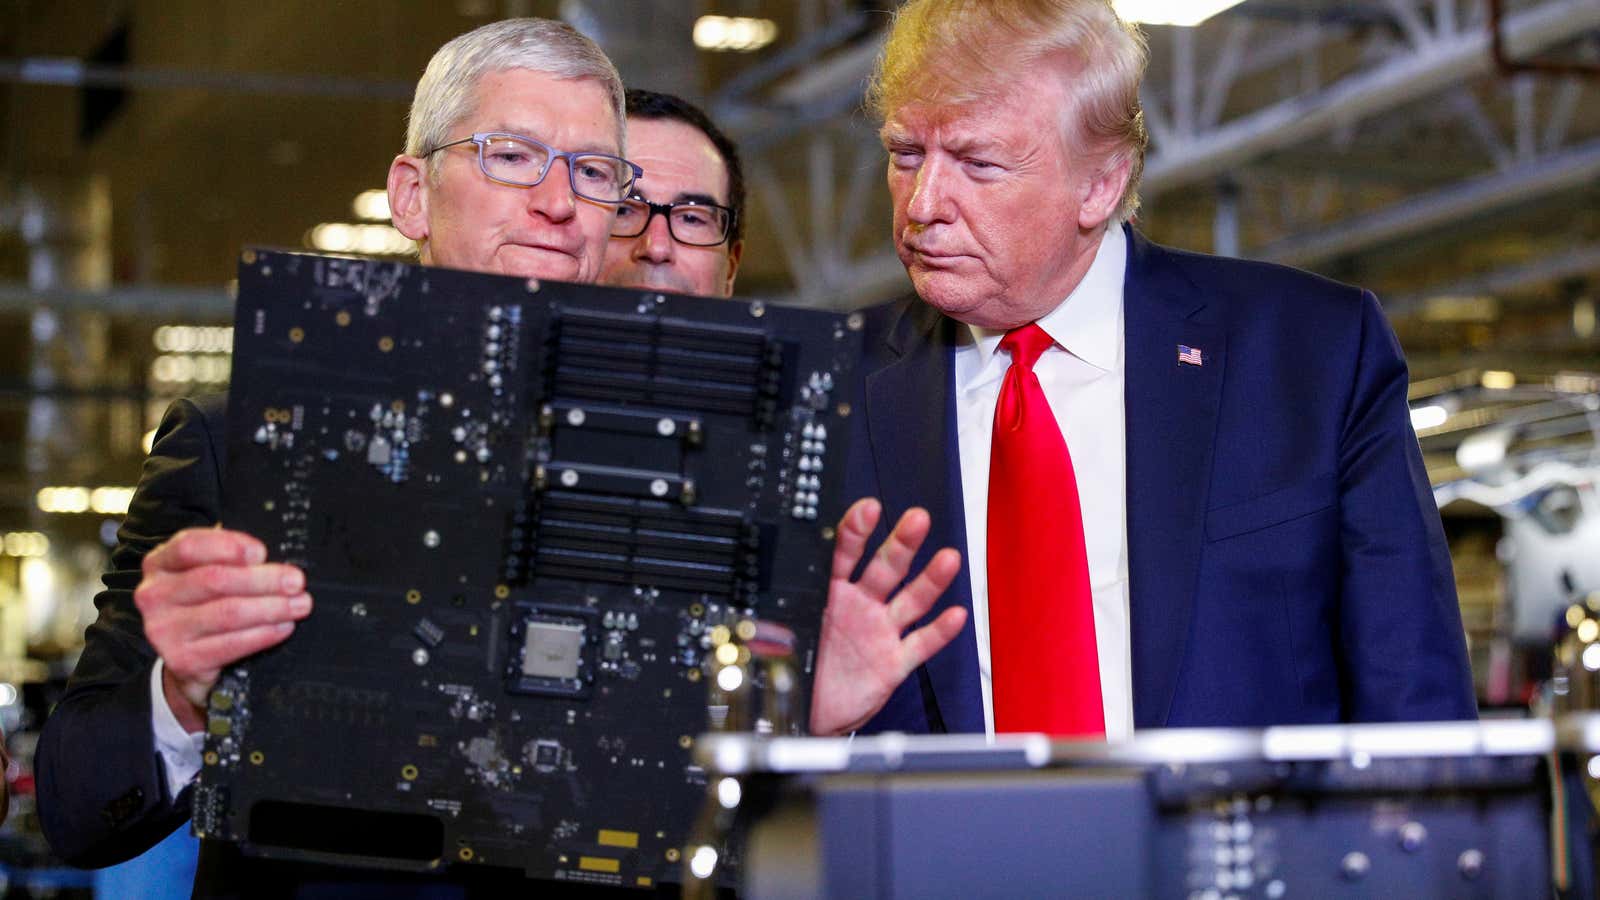 Apple CEO Tim Cook escorts US President Donald Trump as he tours Apple Computer plant in Austin, Texas.